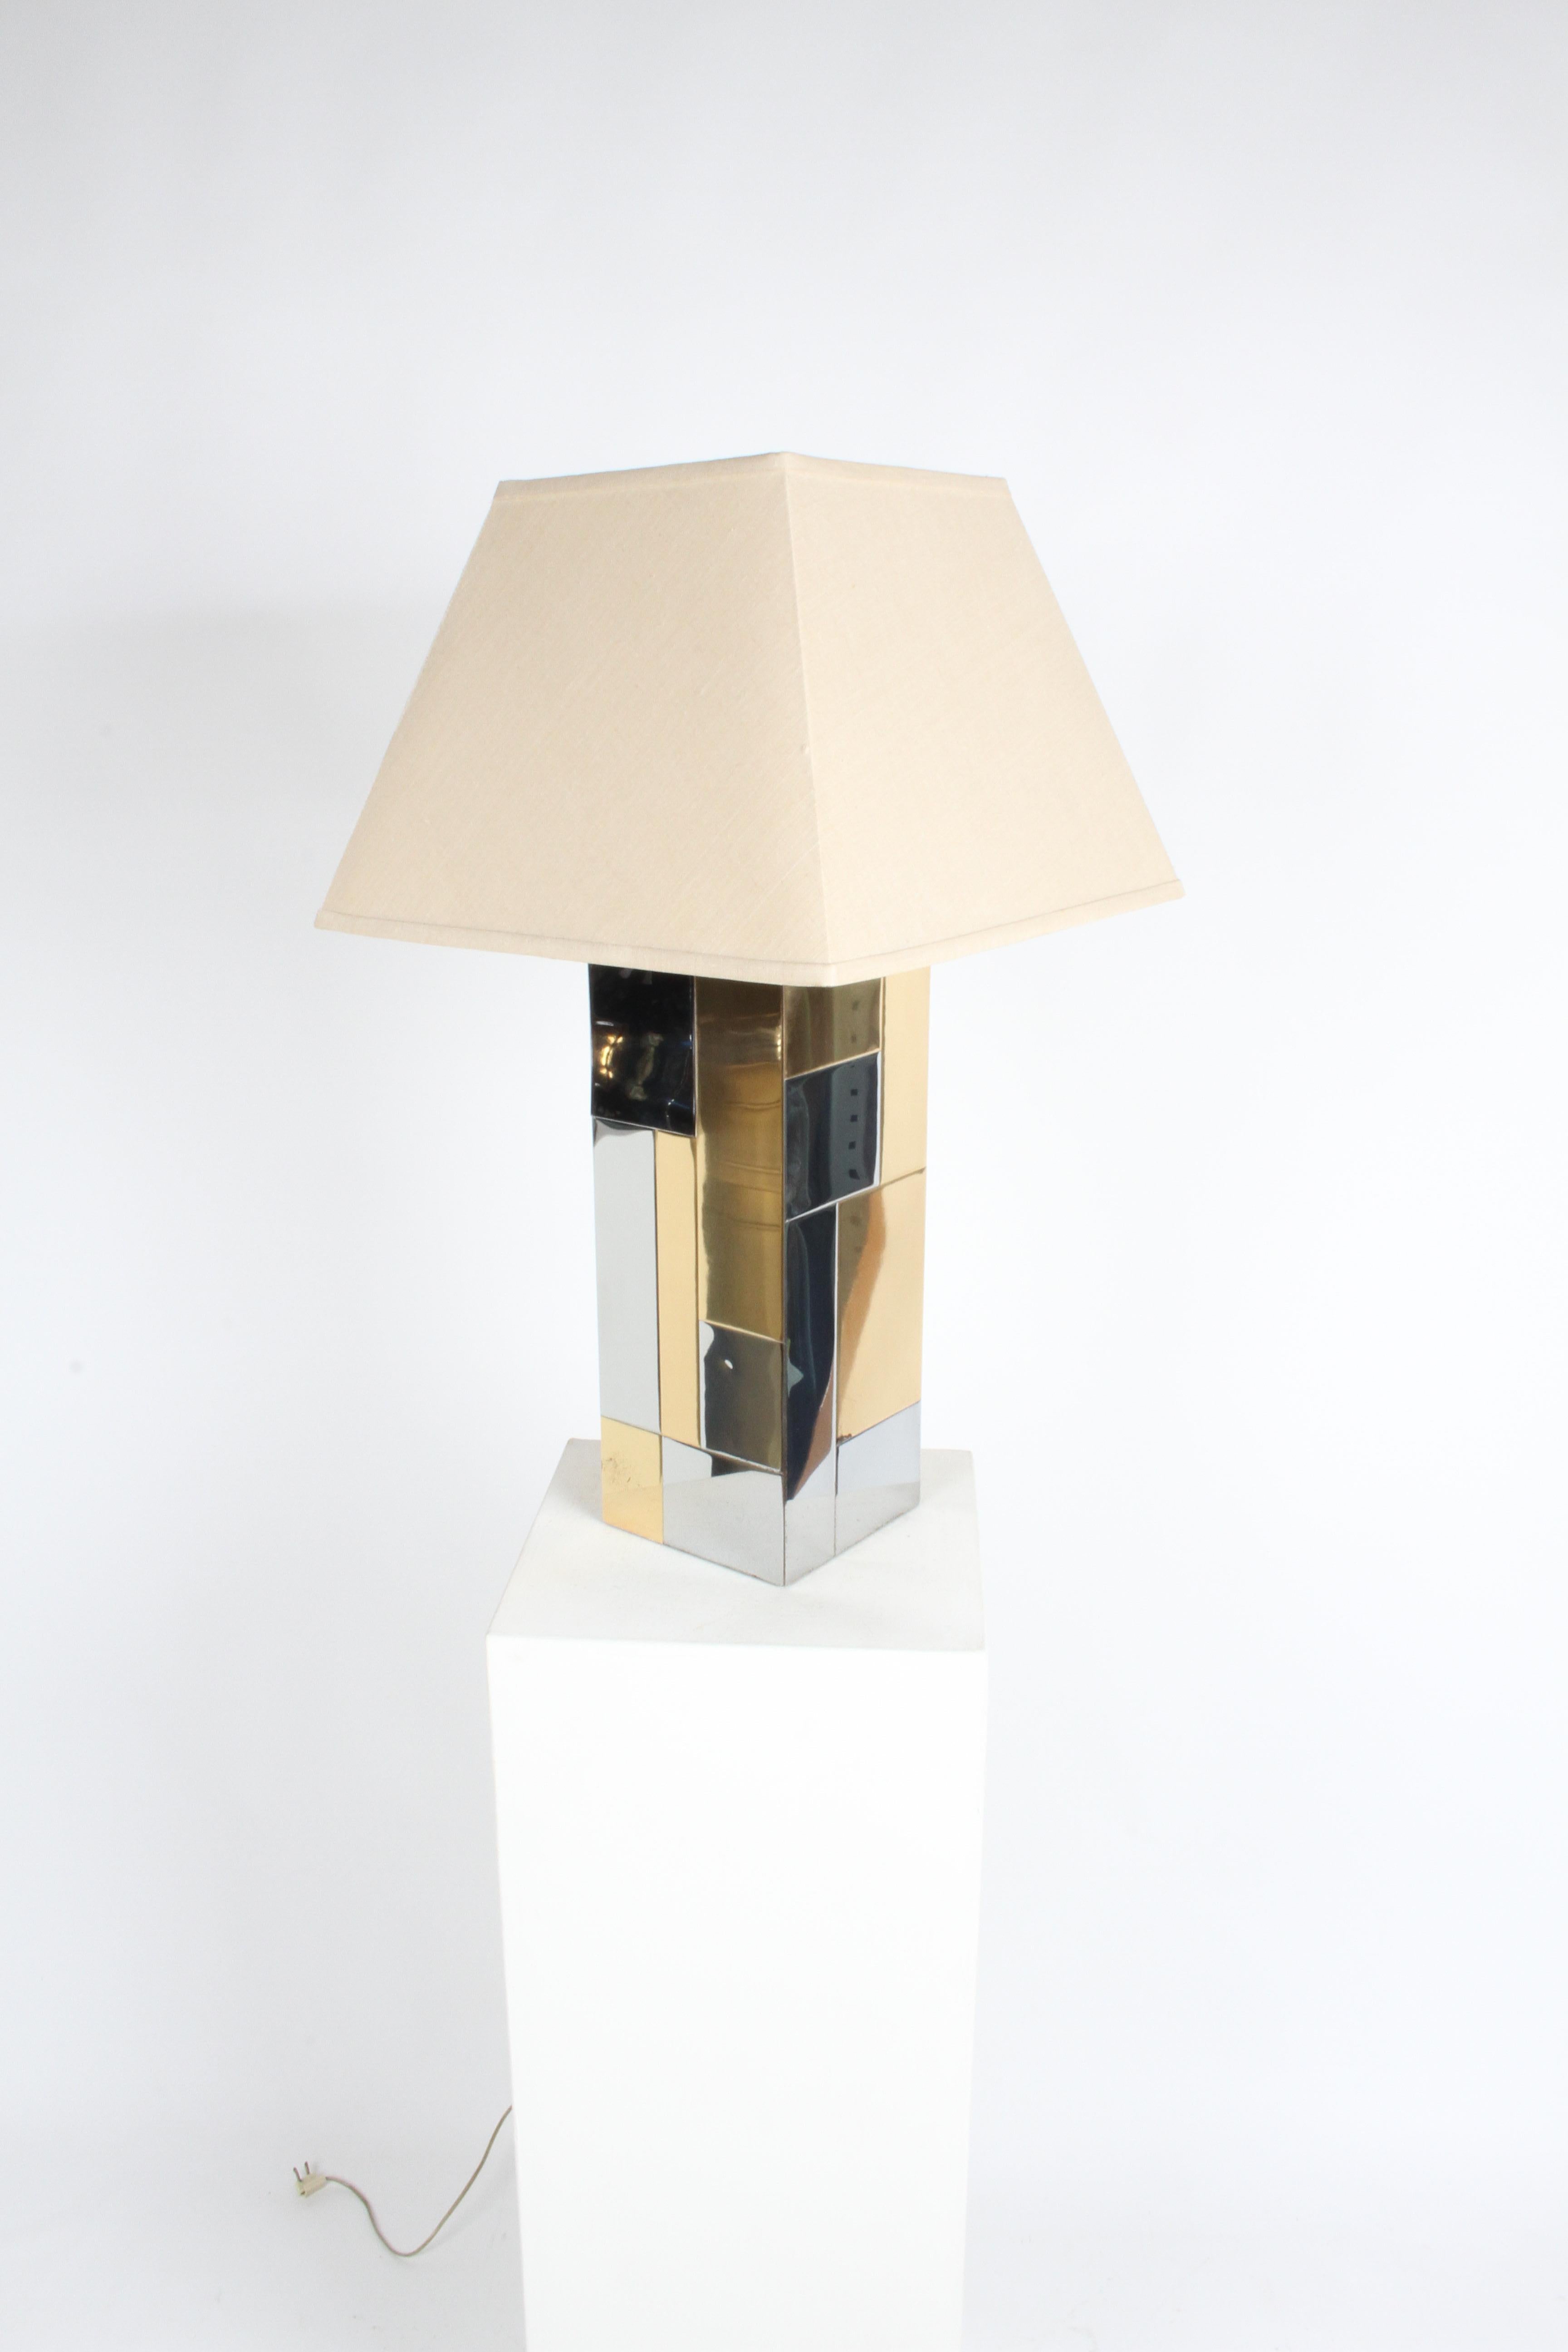 Paul Evans Cityscape brass and chrome table lamp for directional, circa 1970s. Has patina to brass and chrome, two small dings. Works. excludes shade.